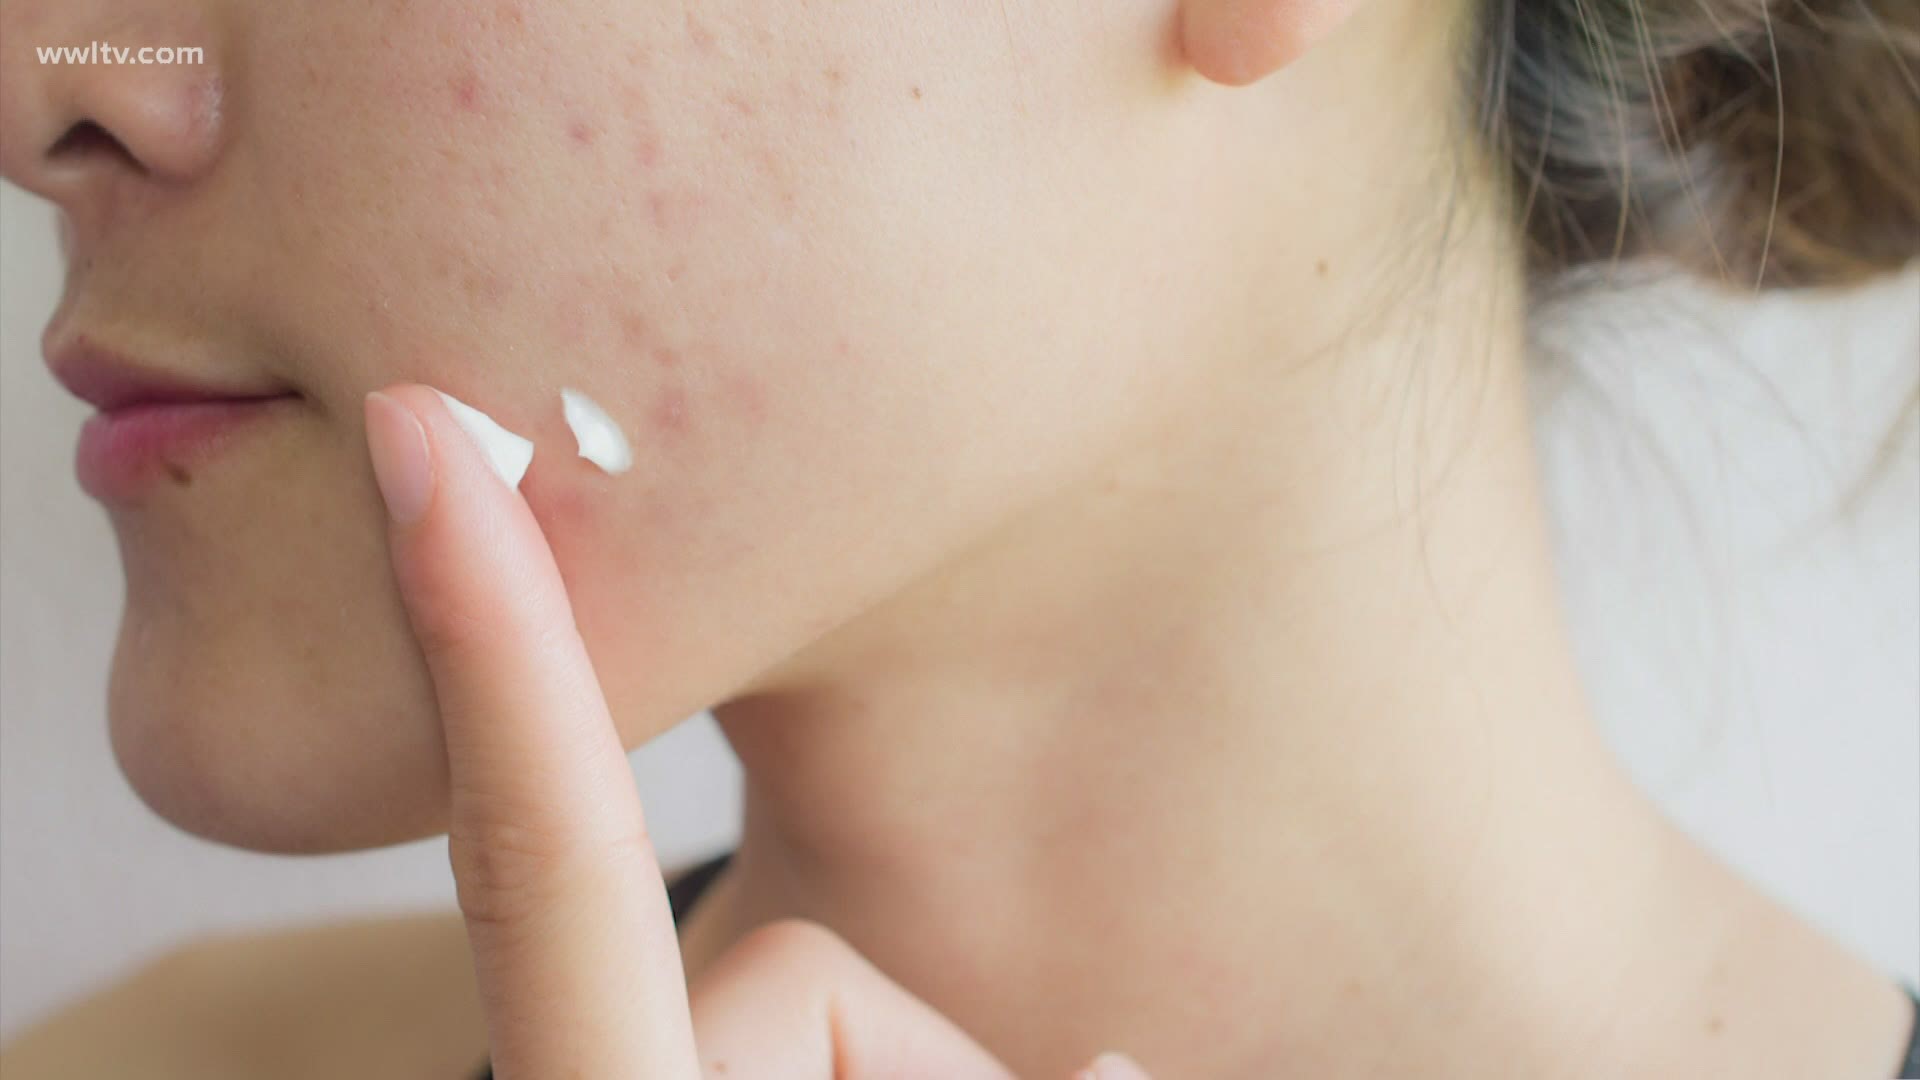 For some women, hormonal acne pops up every month. In this week's "Your Best Life," a hormone expert talks about getting clear skin naturally.